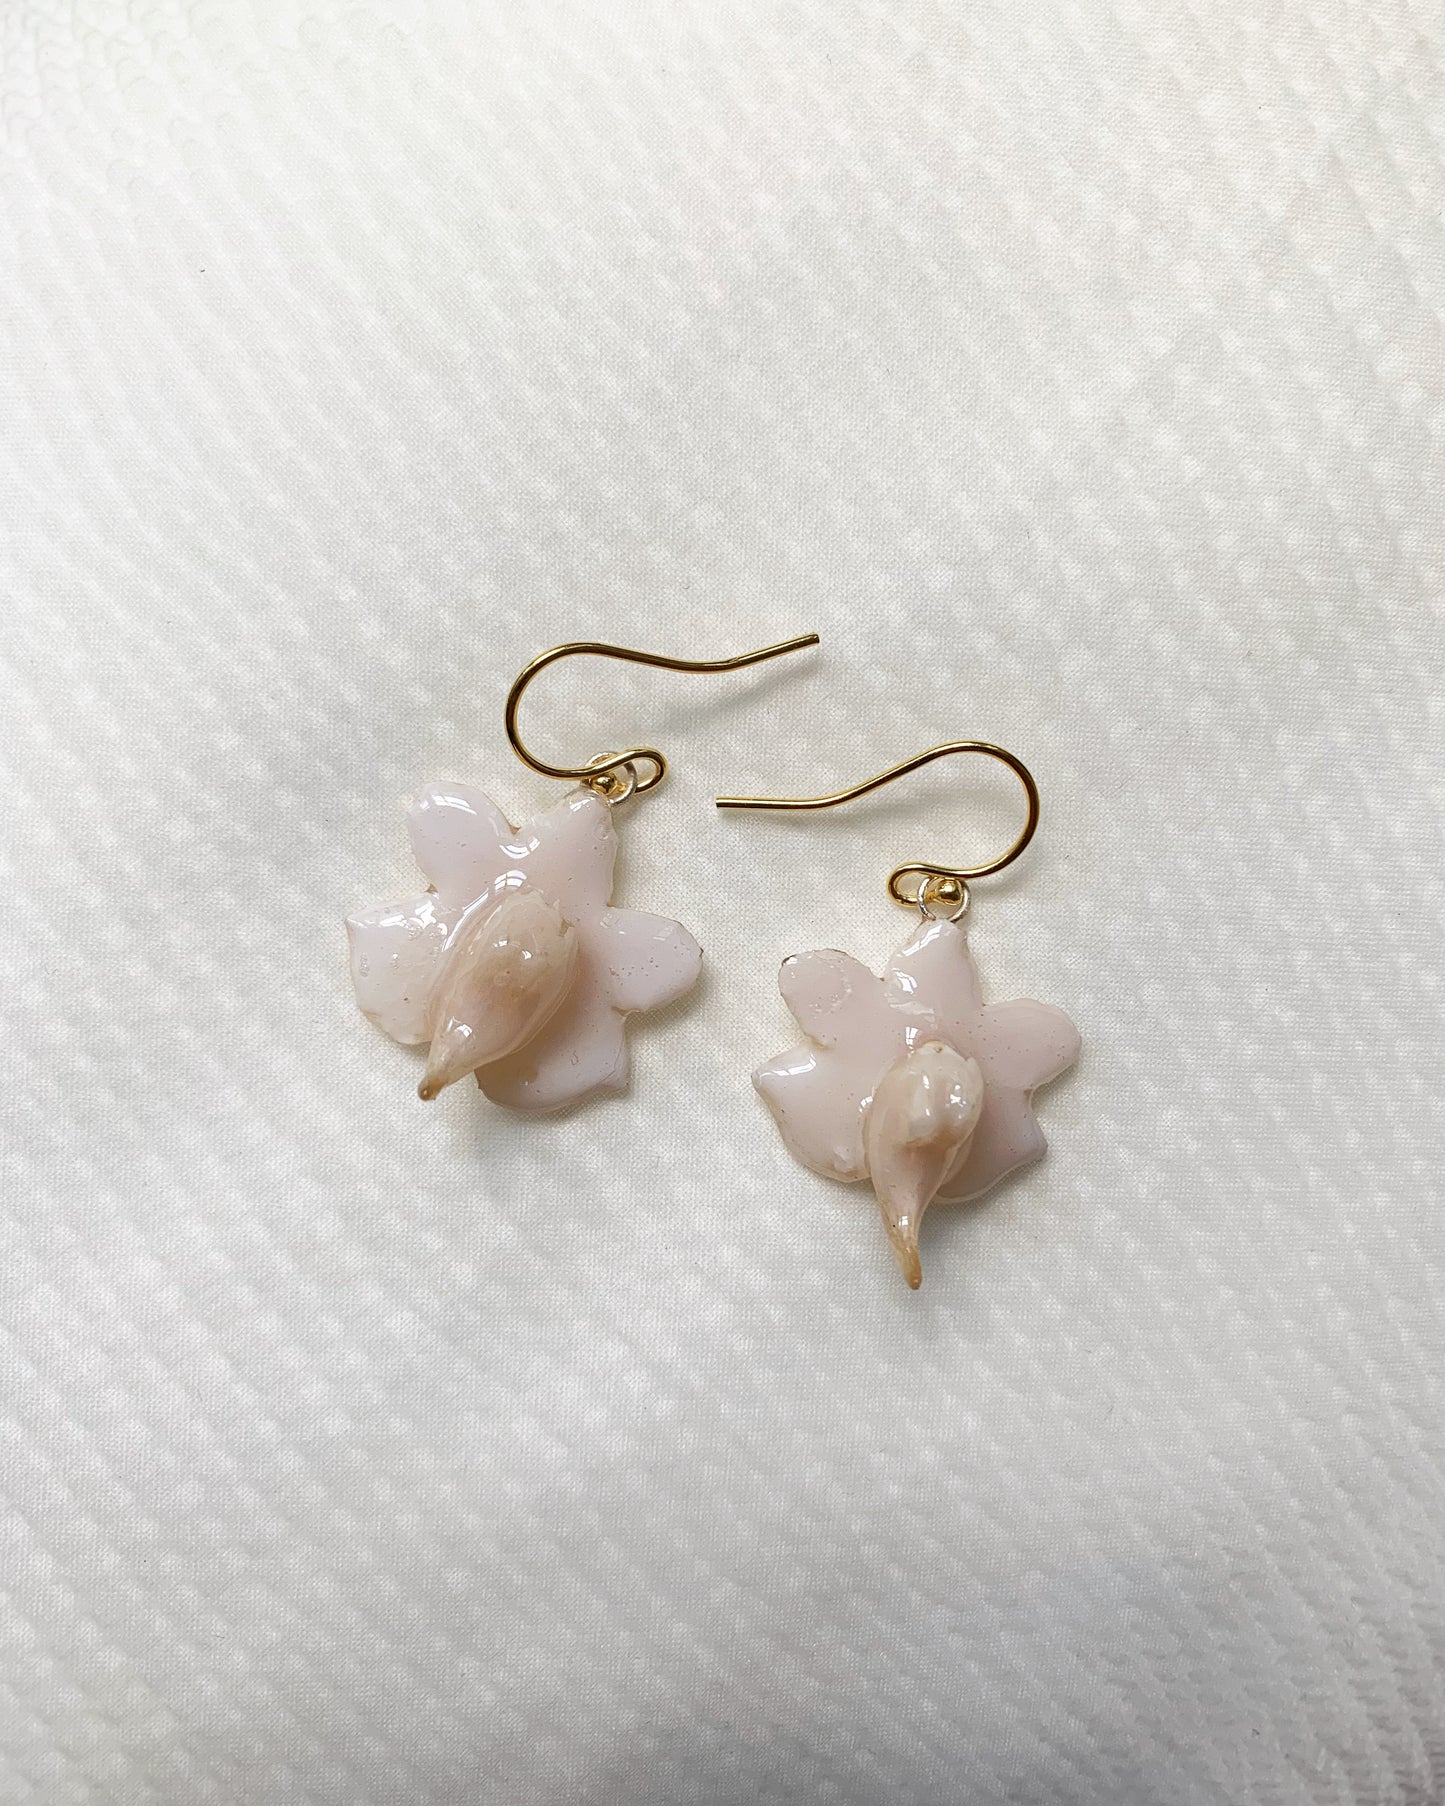 Resin Coated White Vanille Orchid On French Hook Earrings